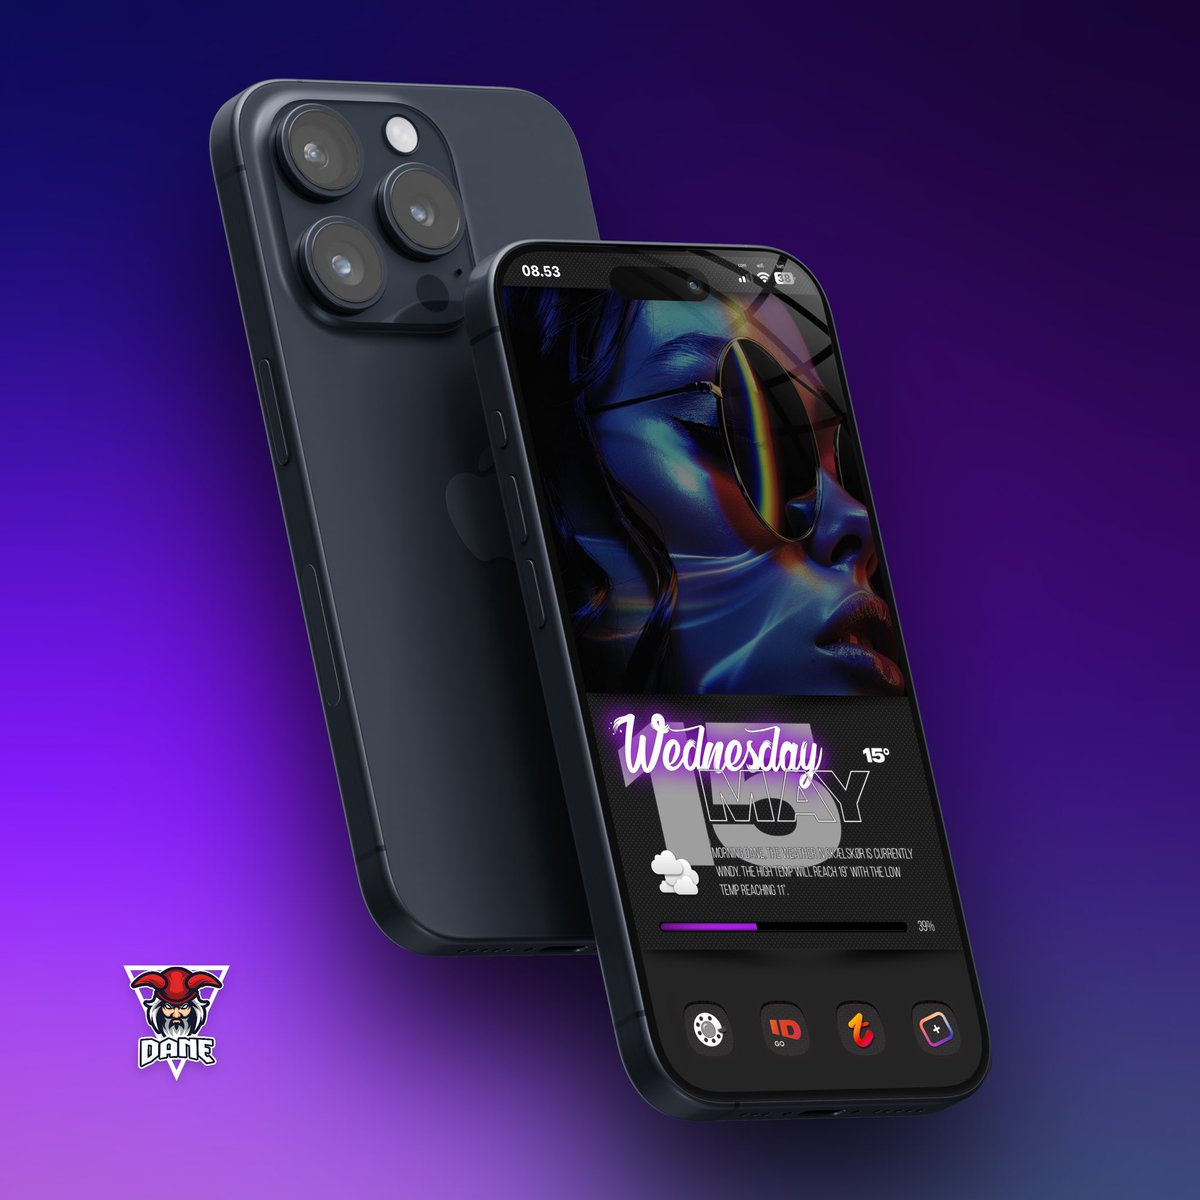 #Yoorweather @JCRocky5 #Ios175 #iphone12pm #nojailbreak #MockupM • wallpaper @SeanKly #M • icons @moondr1 • YW theme @TeboulDavid1 • template @SeanKly